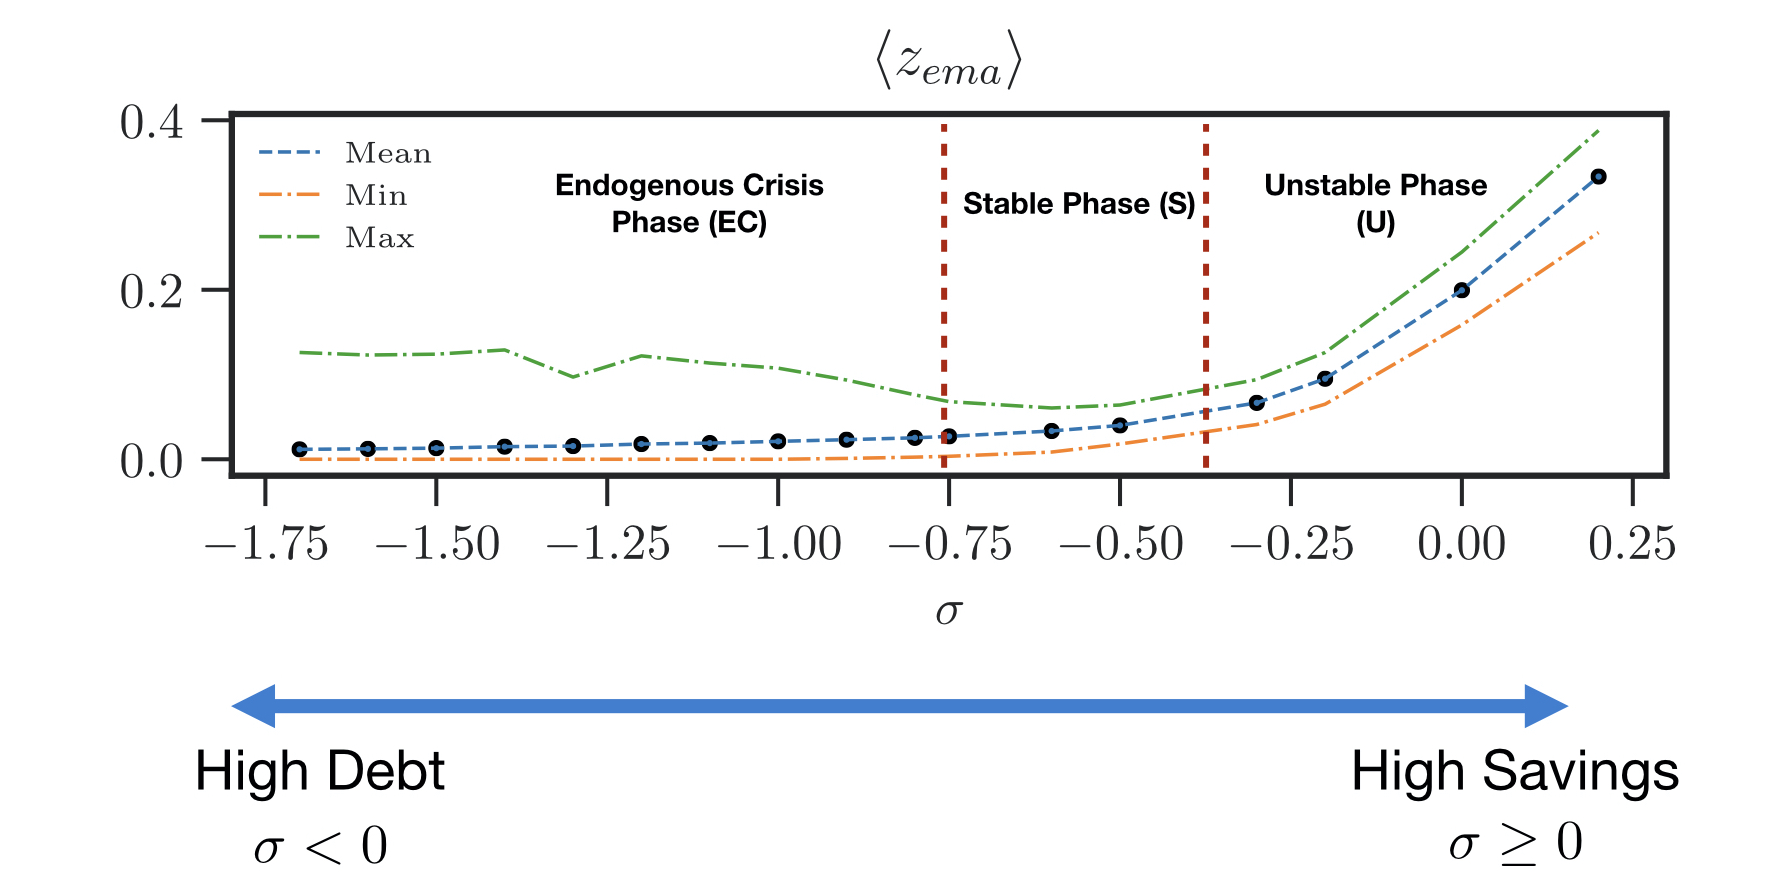 Phases in the CSP based economic model